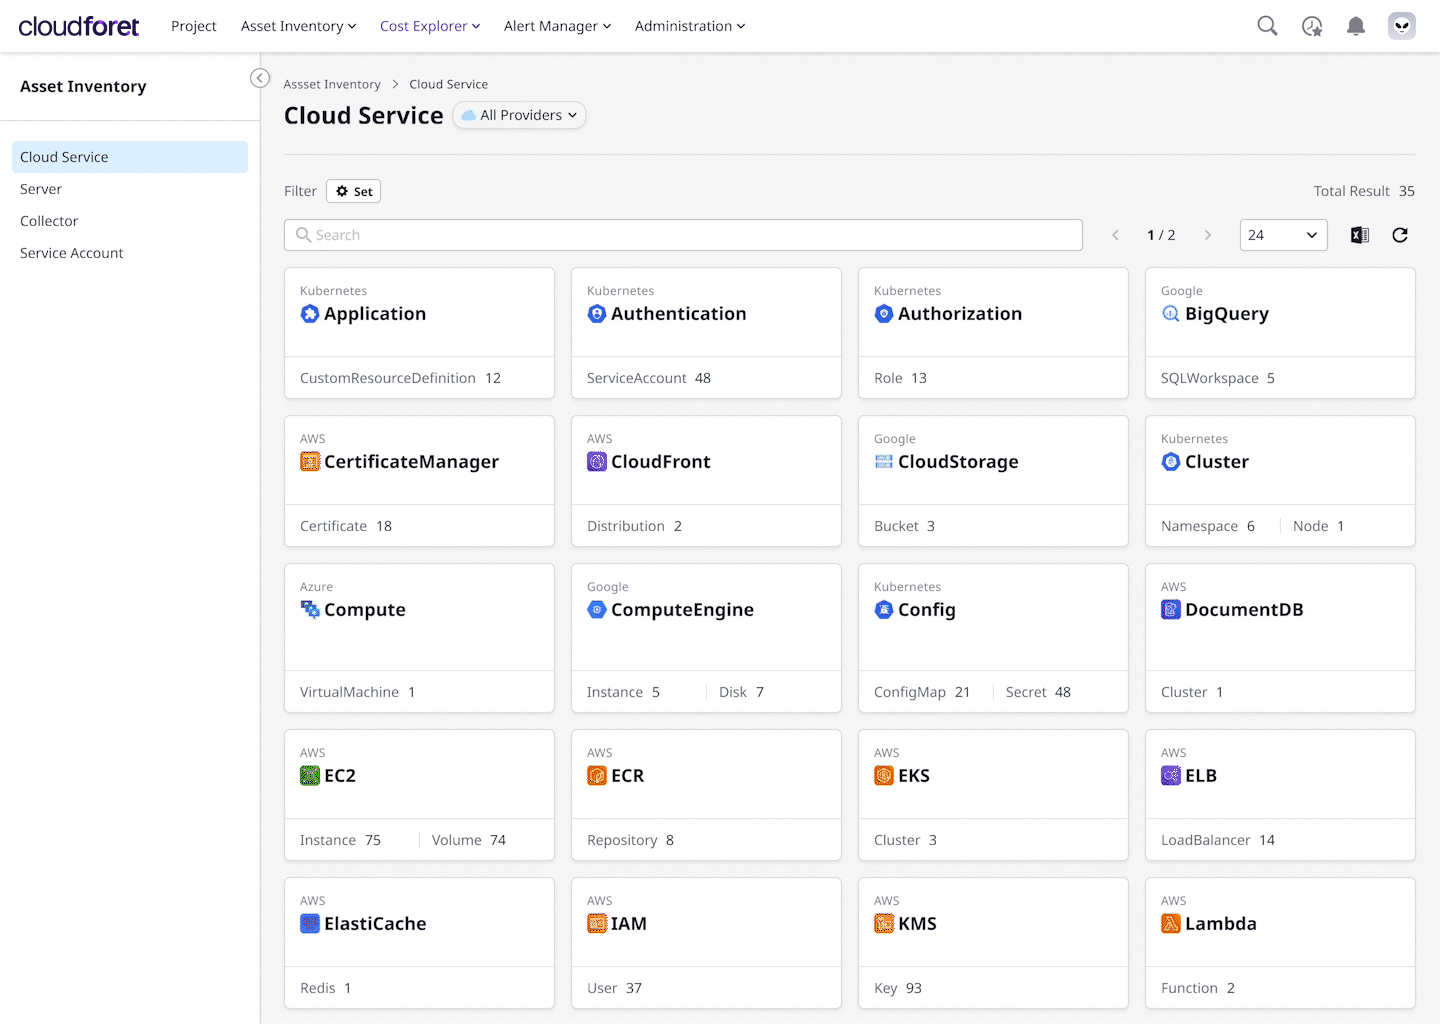 Collect and categorize multi-cloud assets in ONE platform. Search cloud resources quickly and analyze them with detailed information in ONE dashboard.